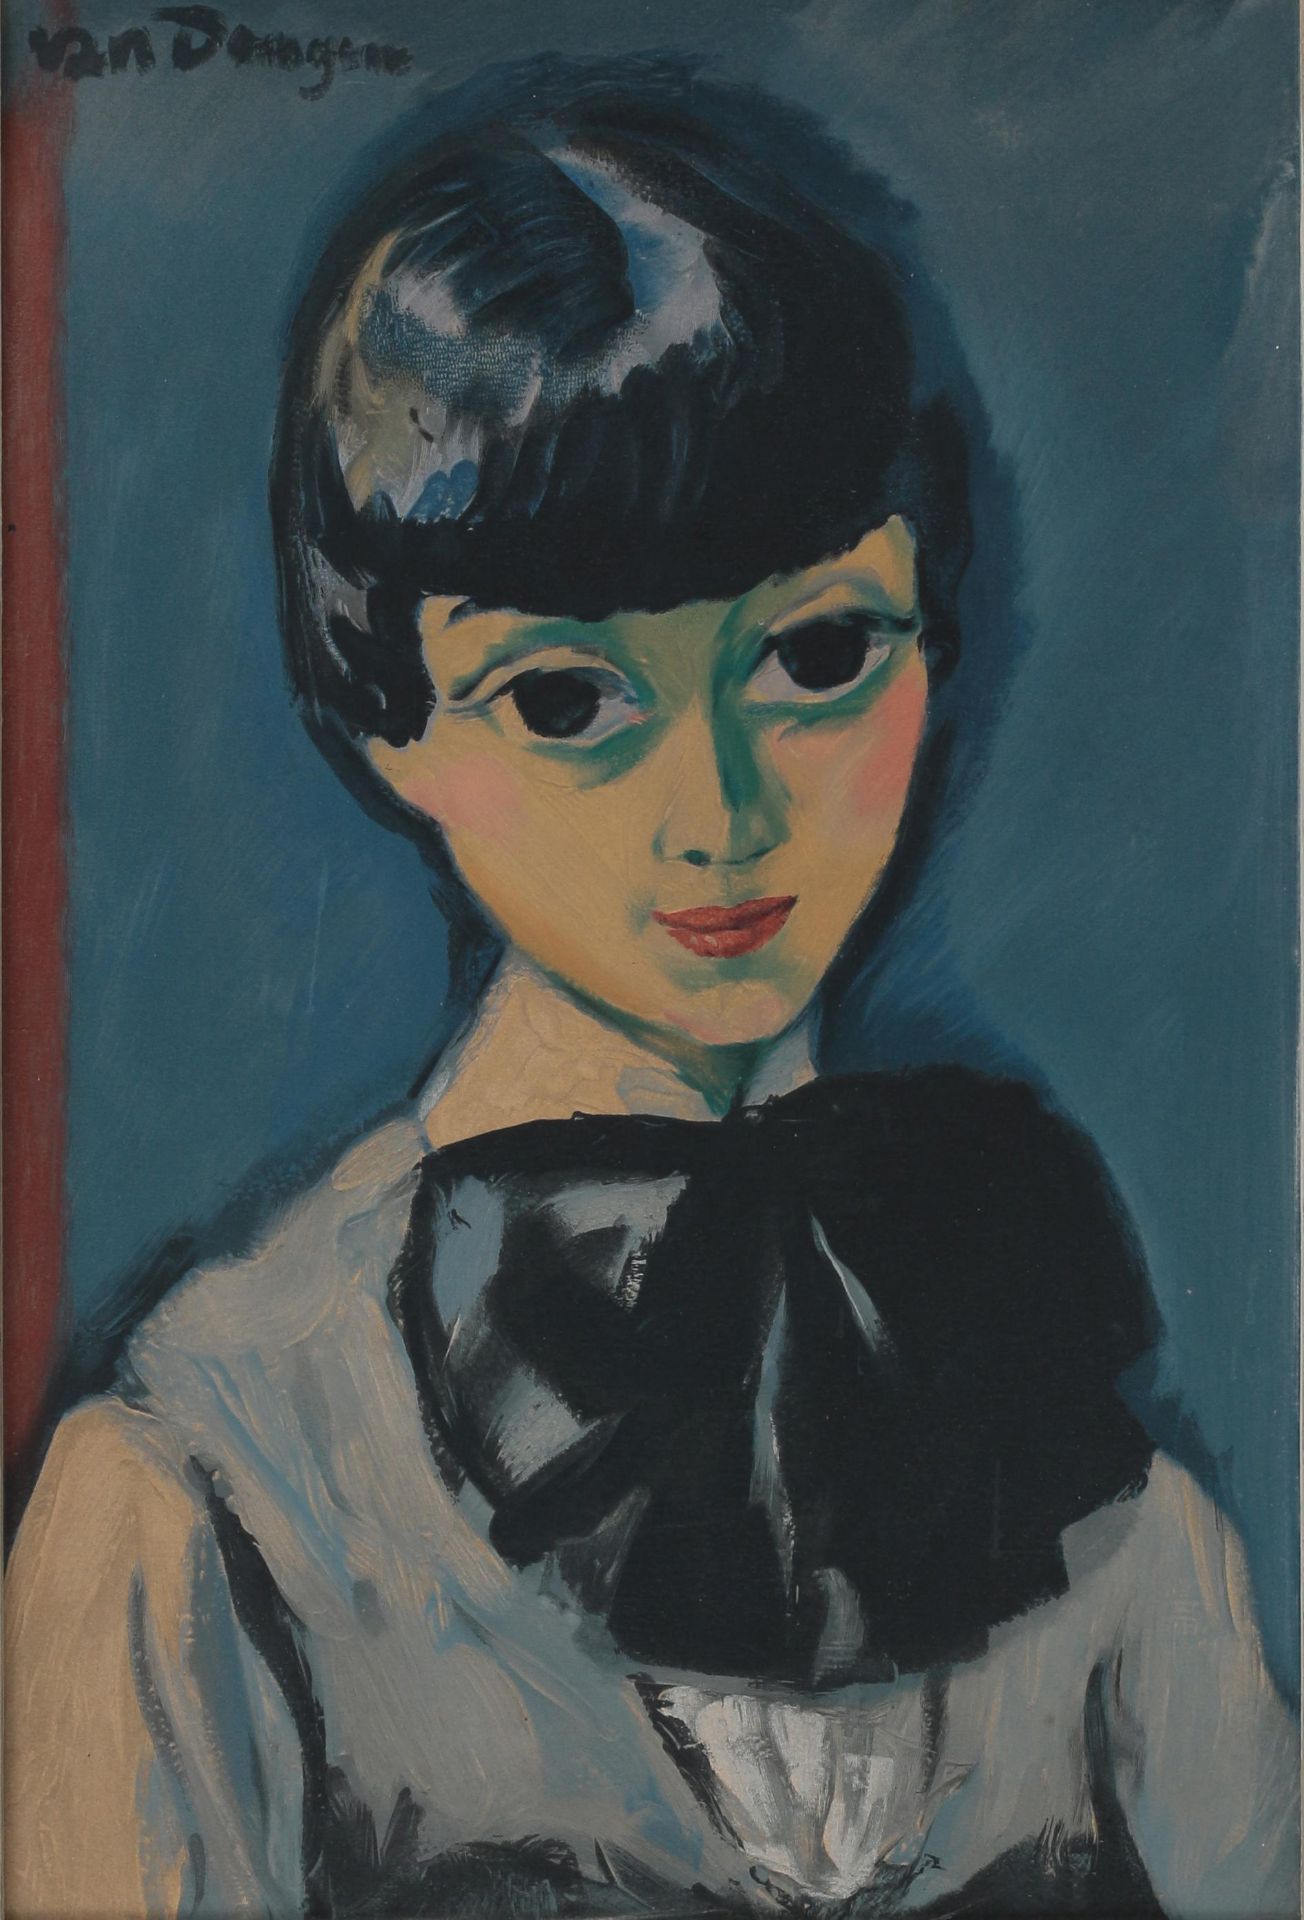 Kees van Dongen (1877-1968) Claudine (1950). From the portfolio Estampes by Robert Rey. Published by